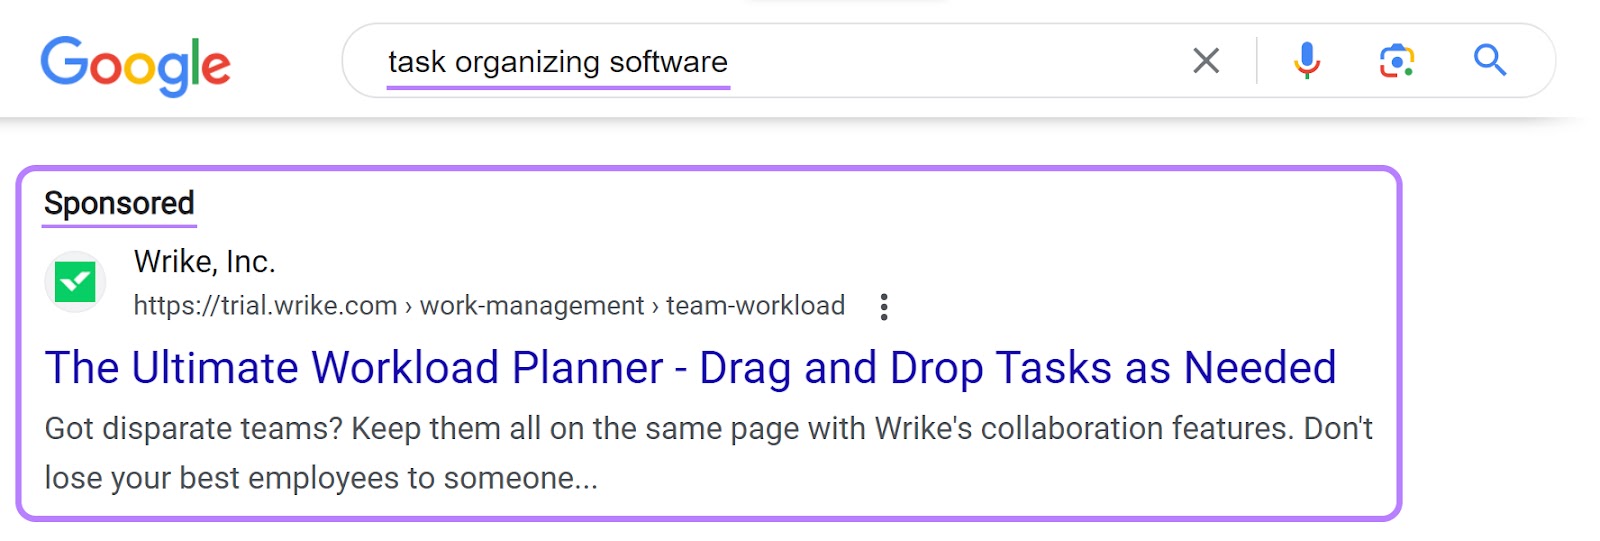 Wrike's search ad for “task organizing software” query